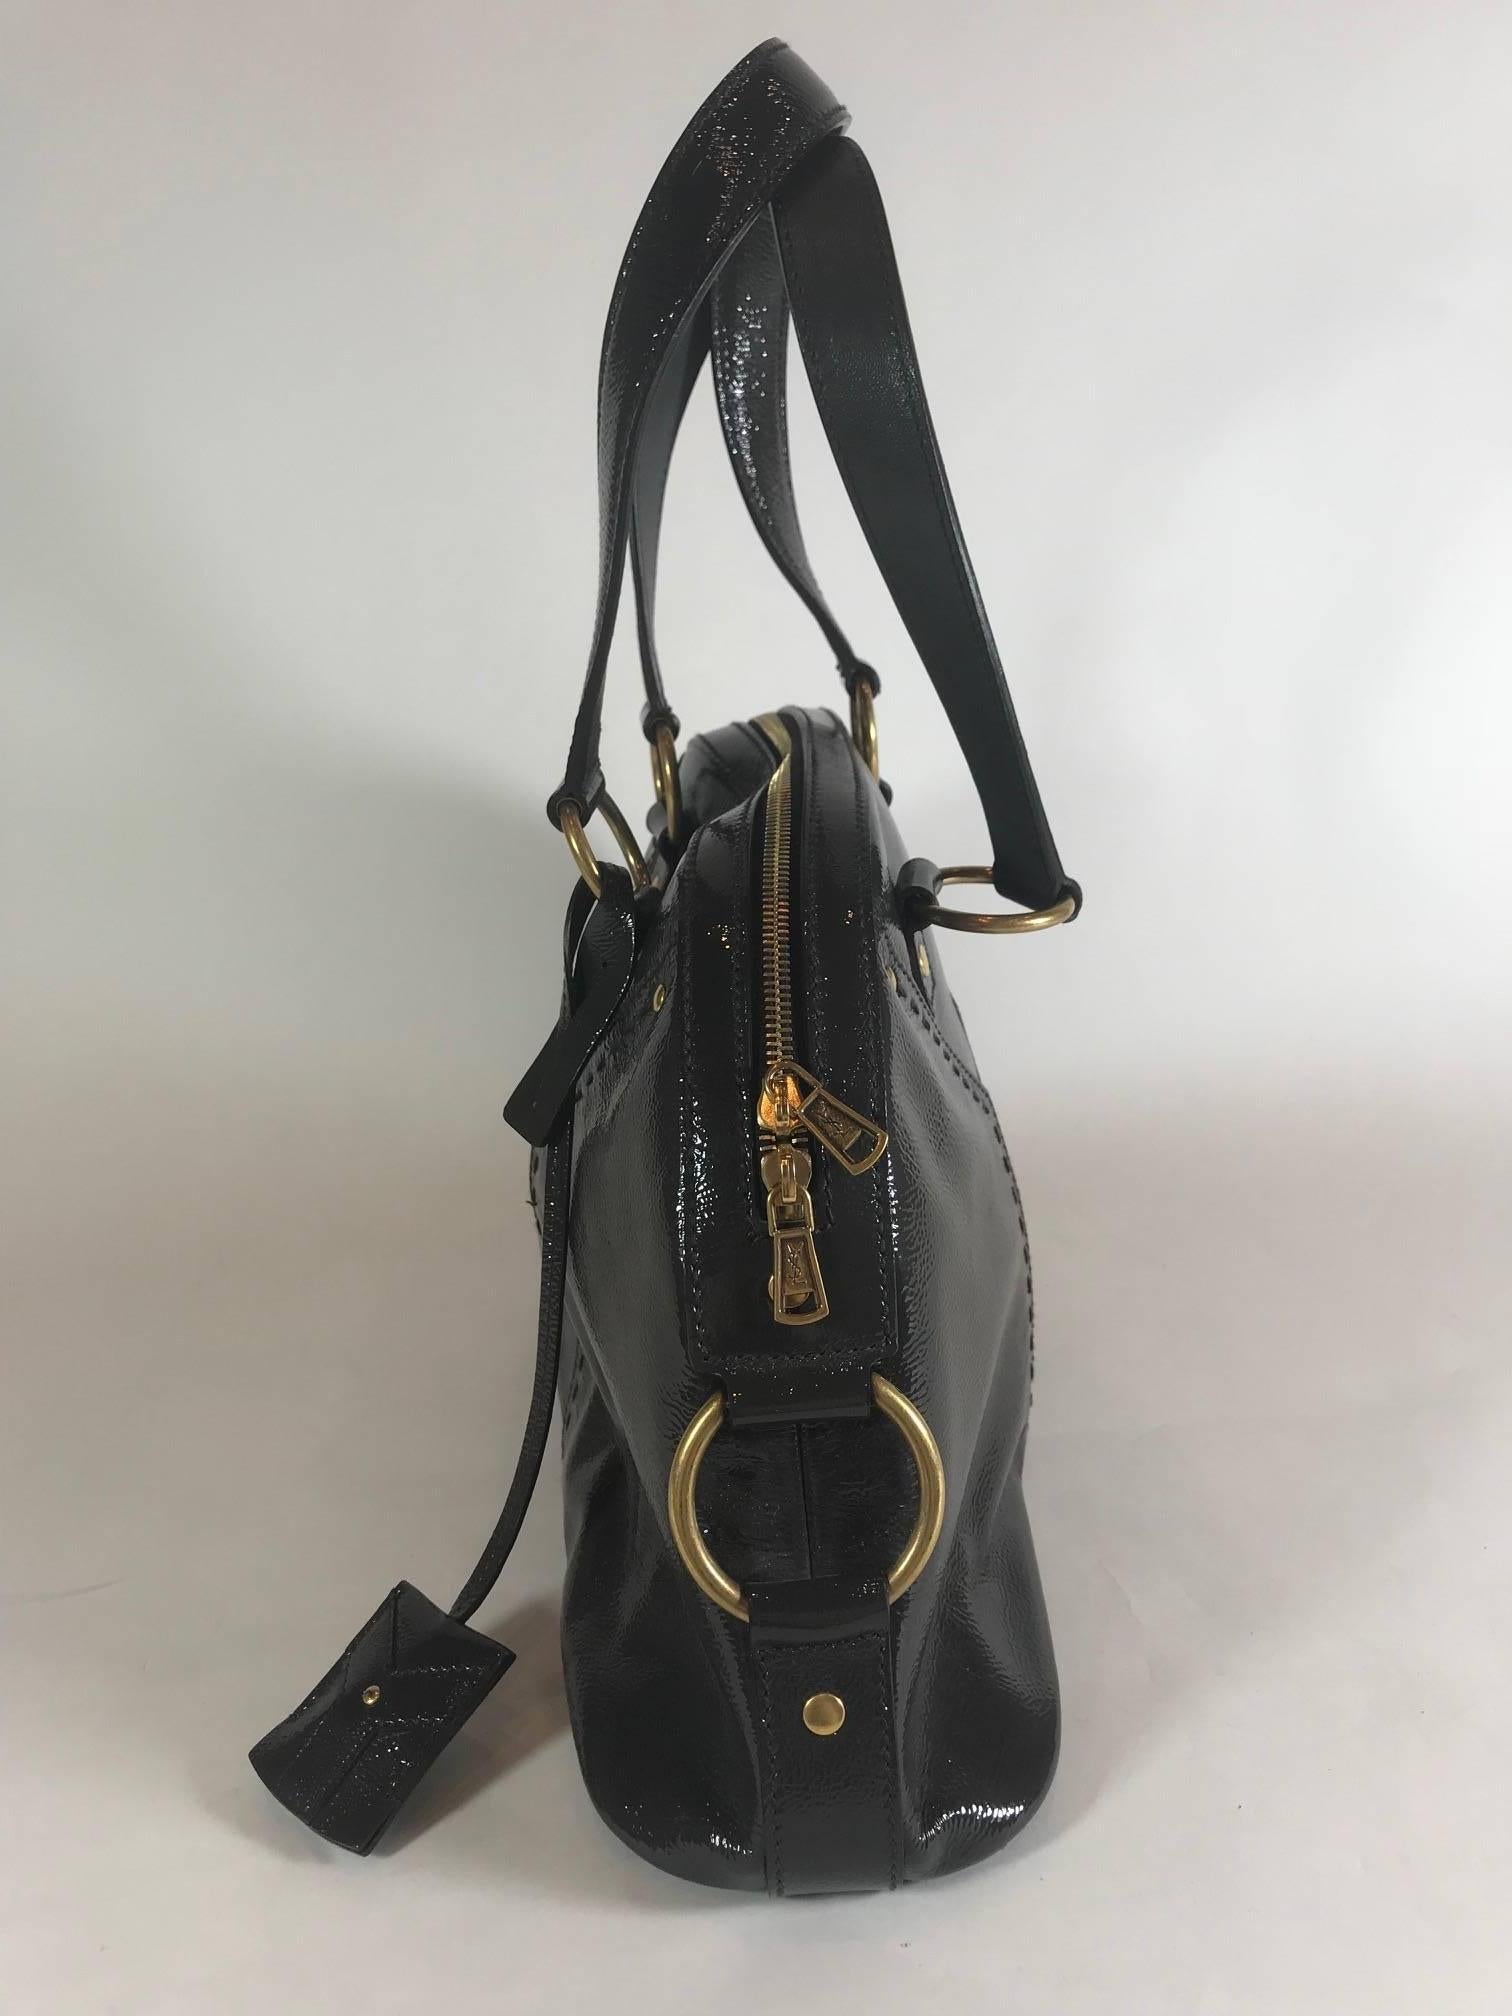 Yves Saint Laurent Muse Bag In Excellent Condition For Sale In Roslyn, NY